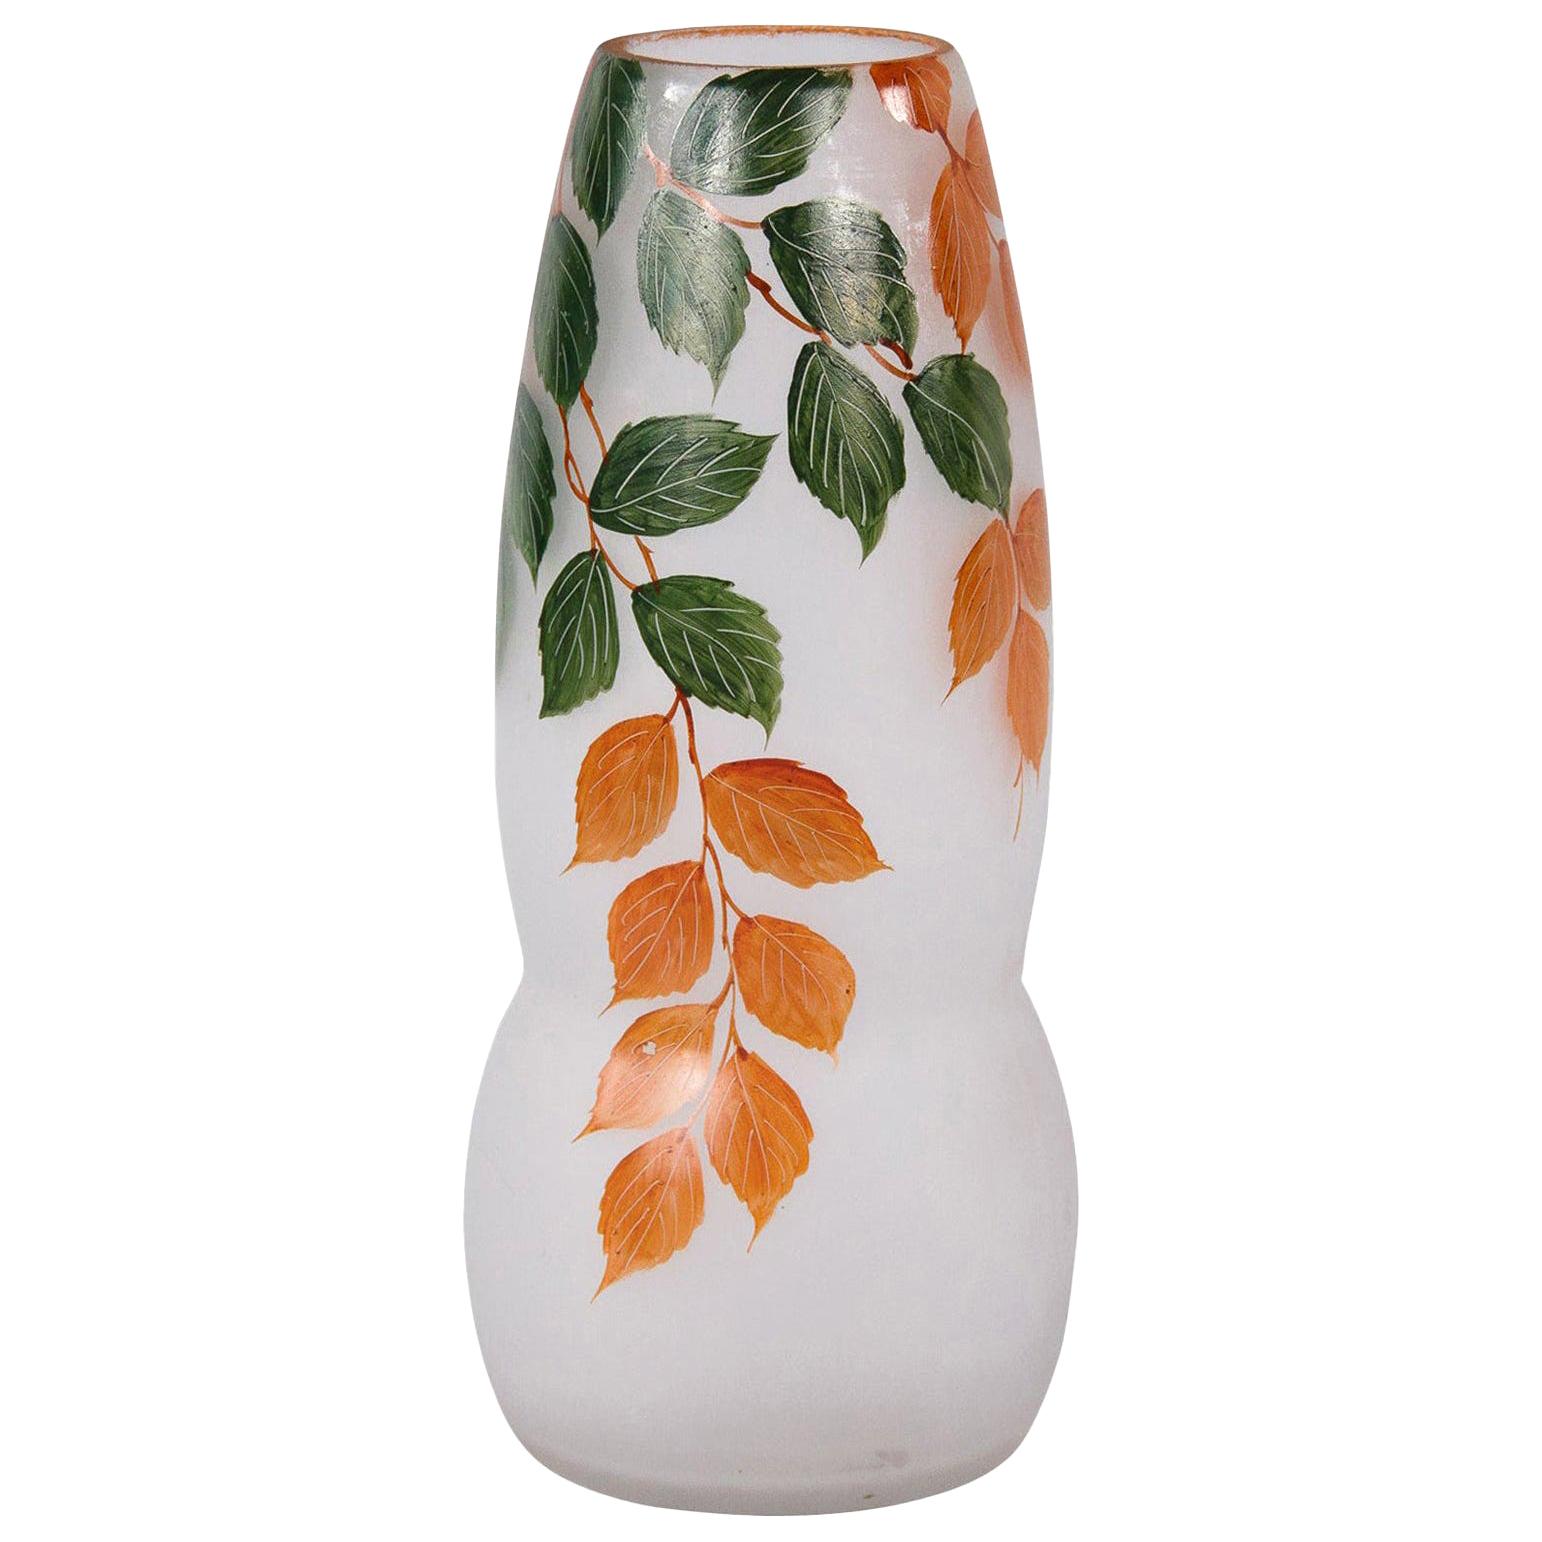 French Frosted Glass Vase with Hand Painted Foliage Motifs, 1900s For Sale